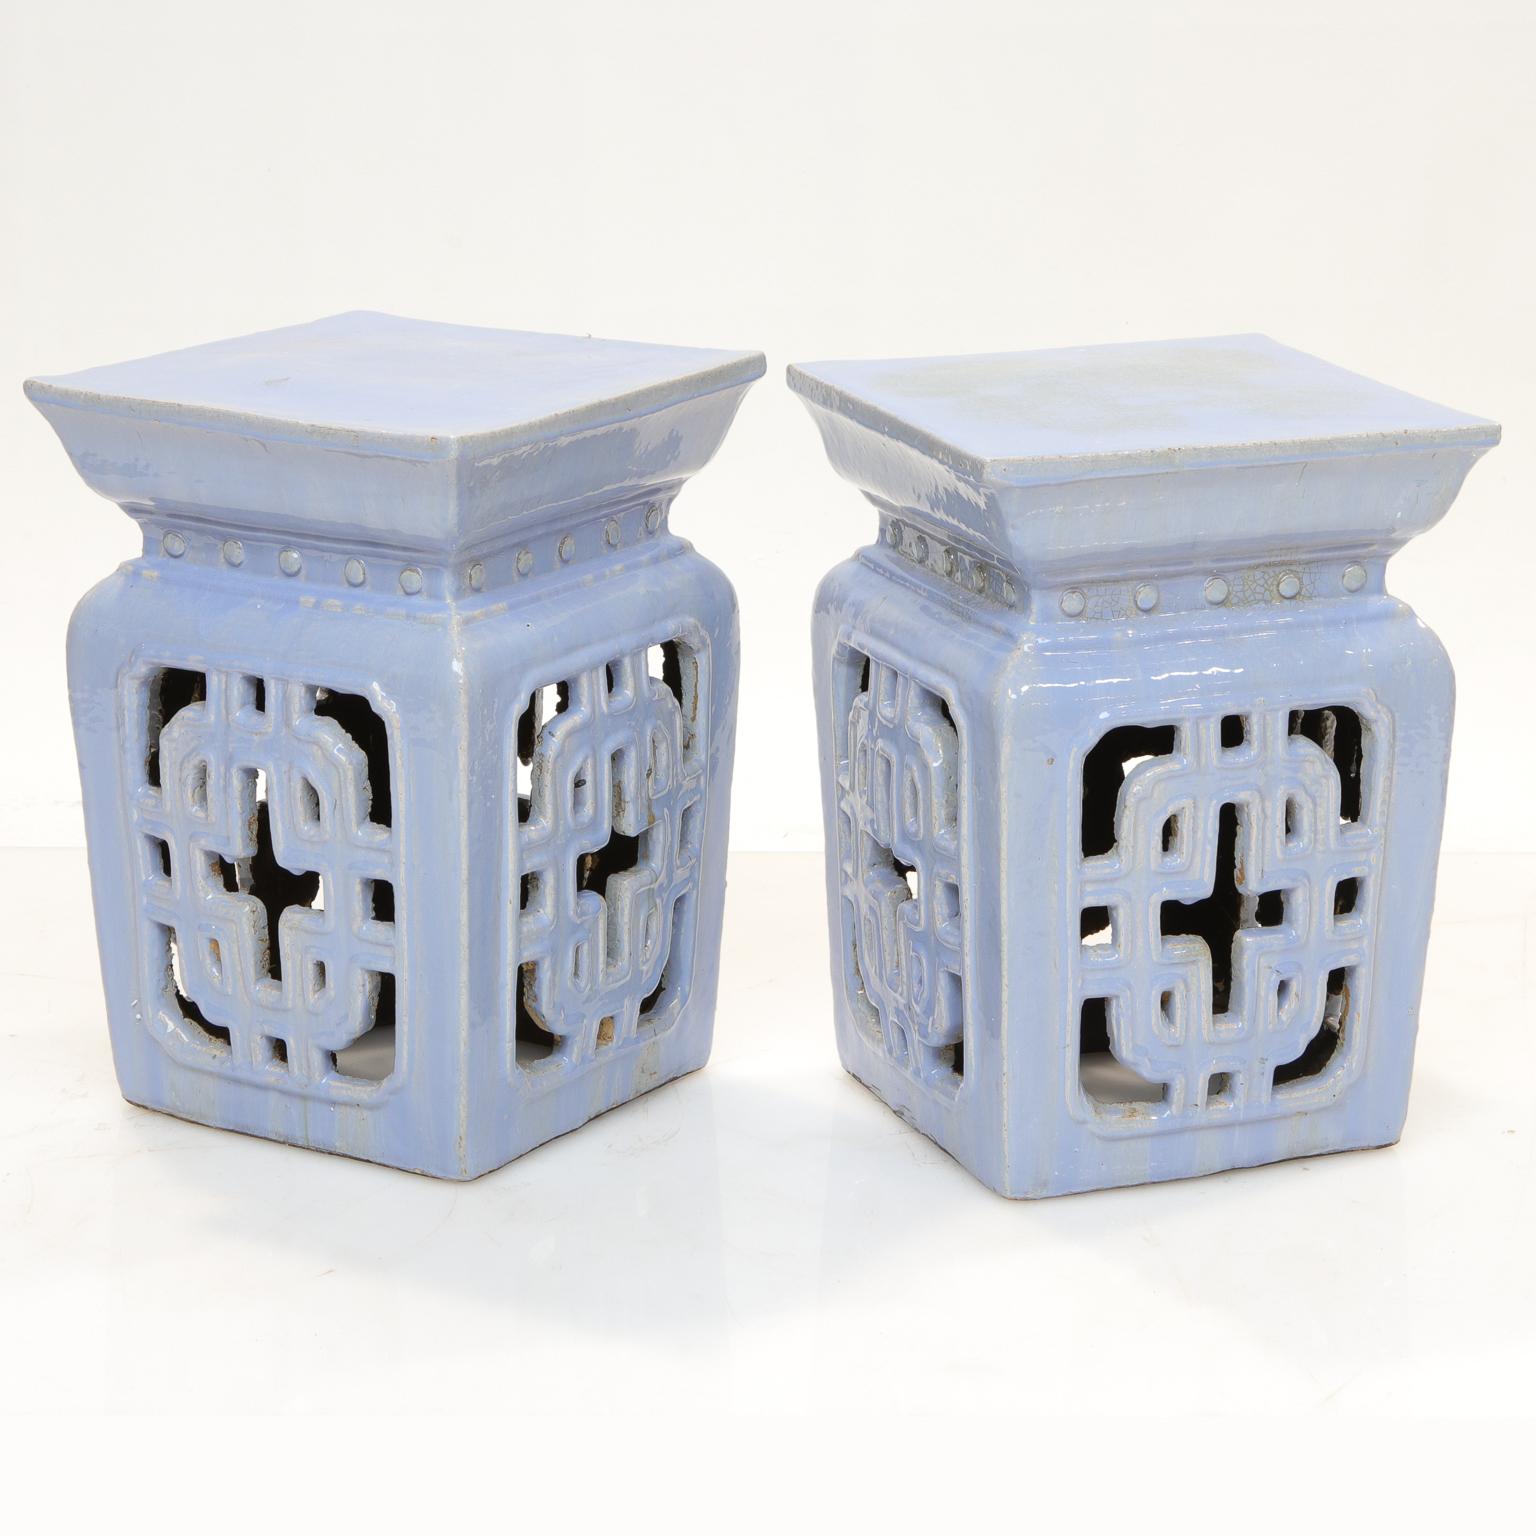 A pair of ceramic Chinese garden seats with pierced design (usually patterned after designs of shutters). Square tops. A great color blue, soft and striking color. Very good condition. Almost a periwinkle blue/purple. Cool color!